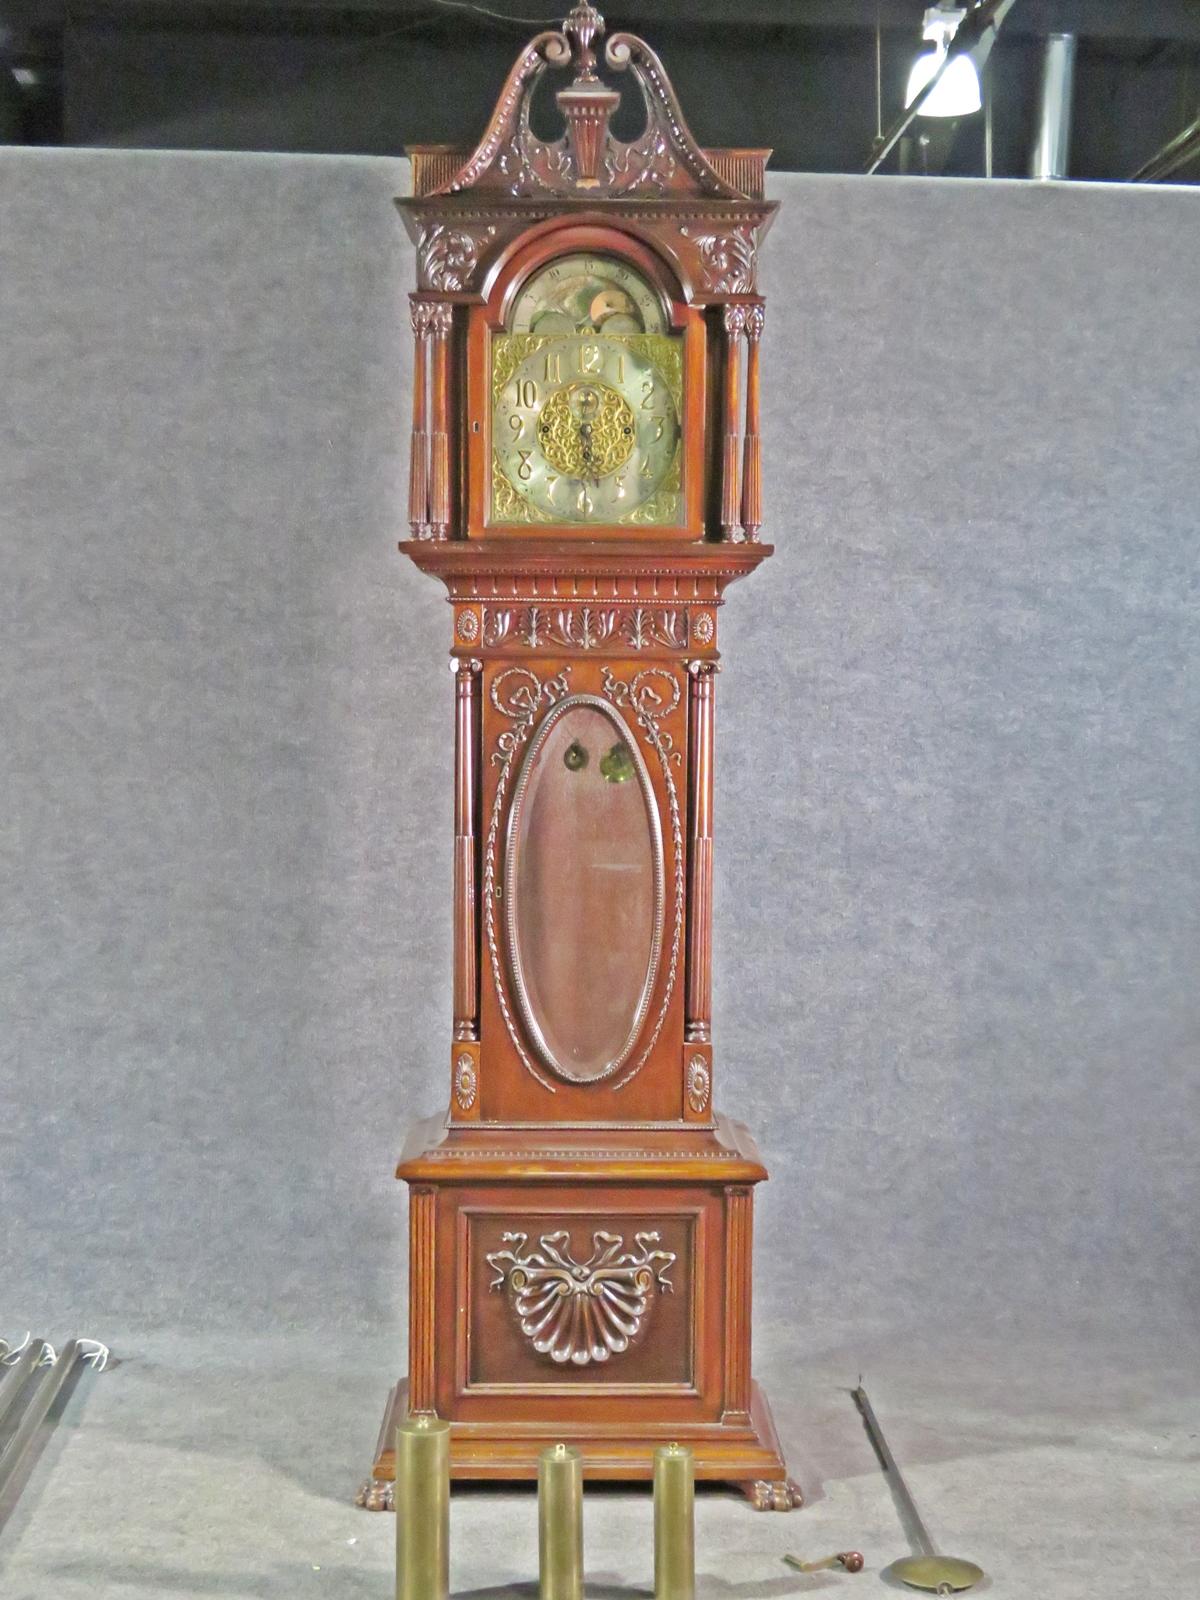 clocks from the early 1900s